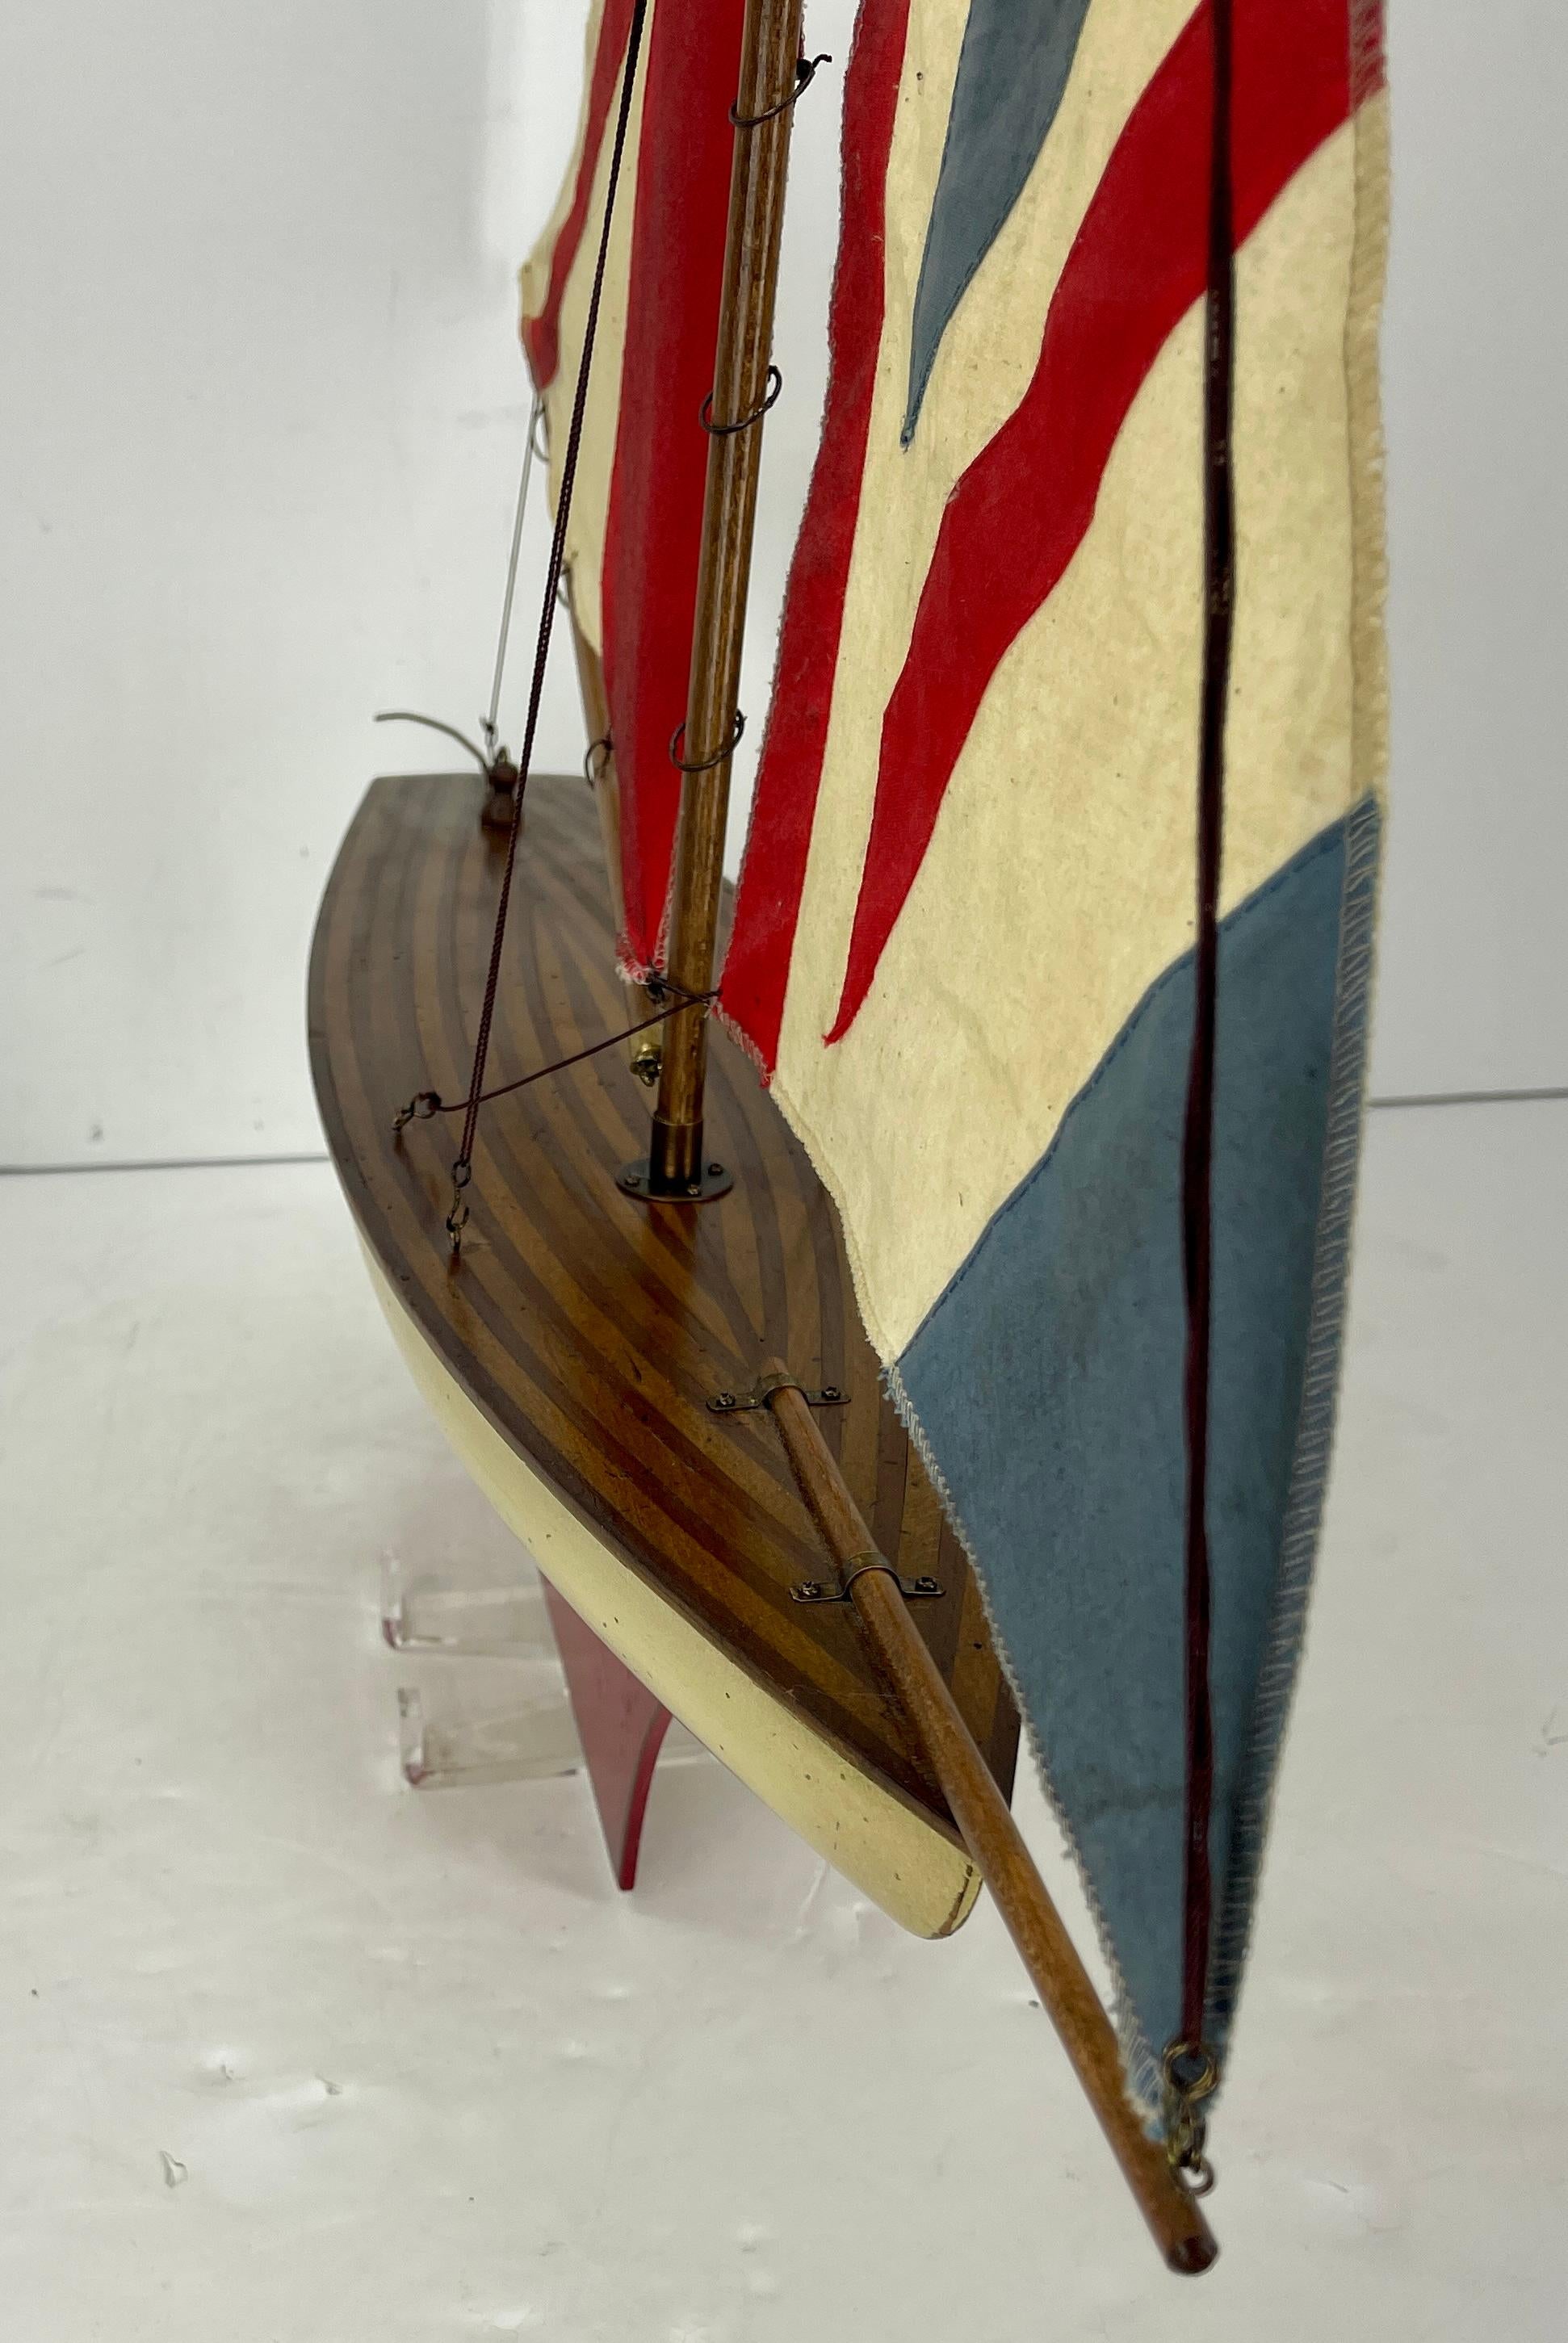 English Carved Wood Sailboat Model with Parquetry Deck and Union Jack Sailcloth 6